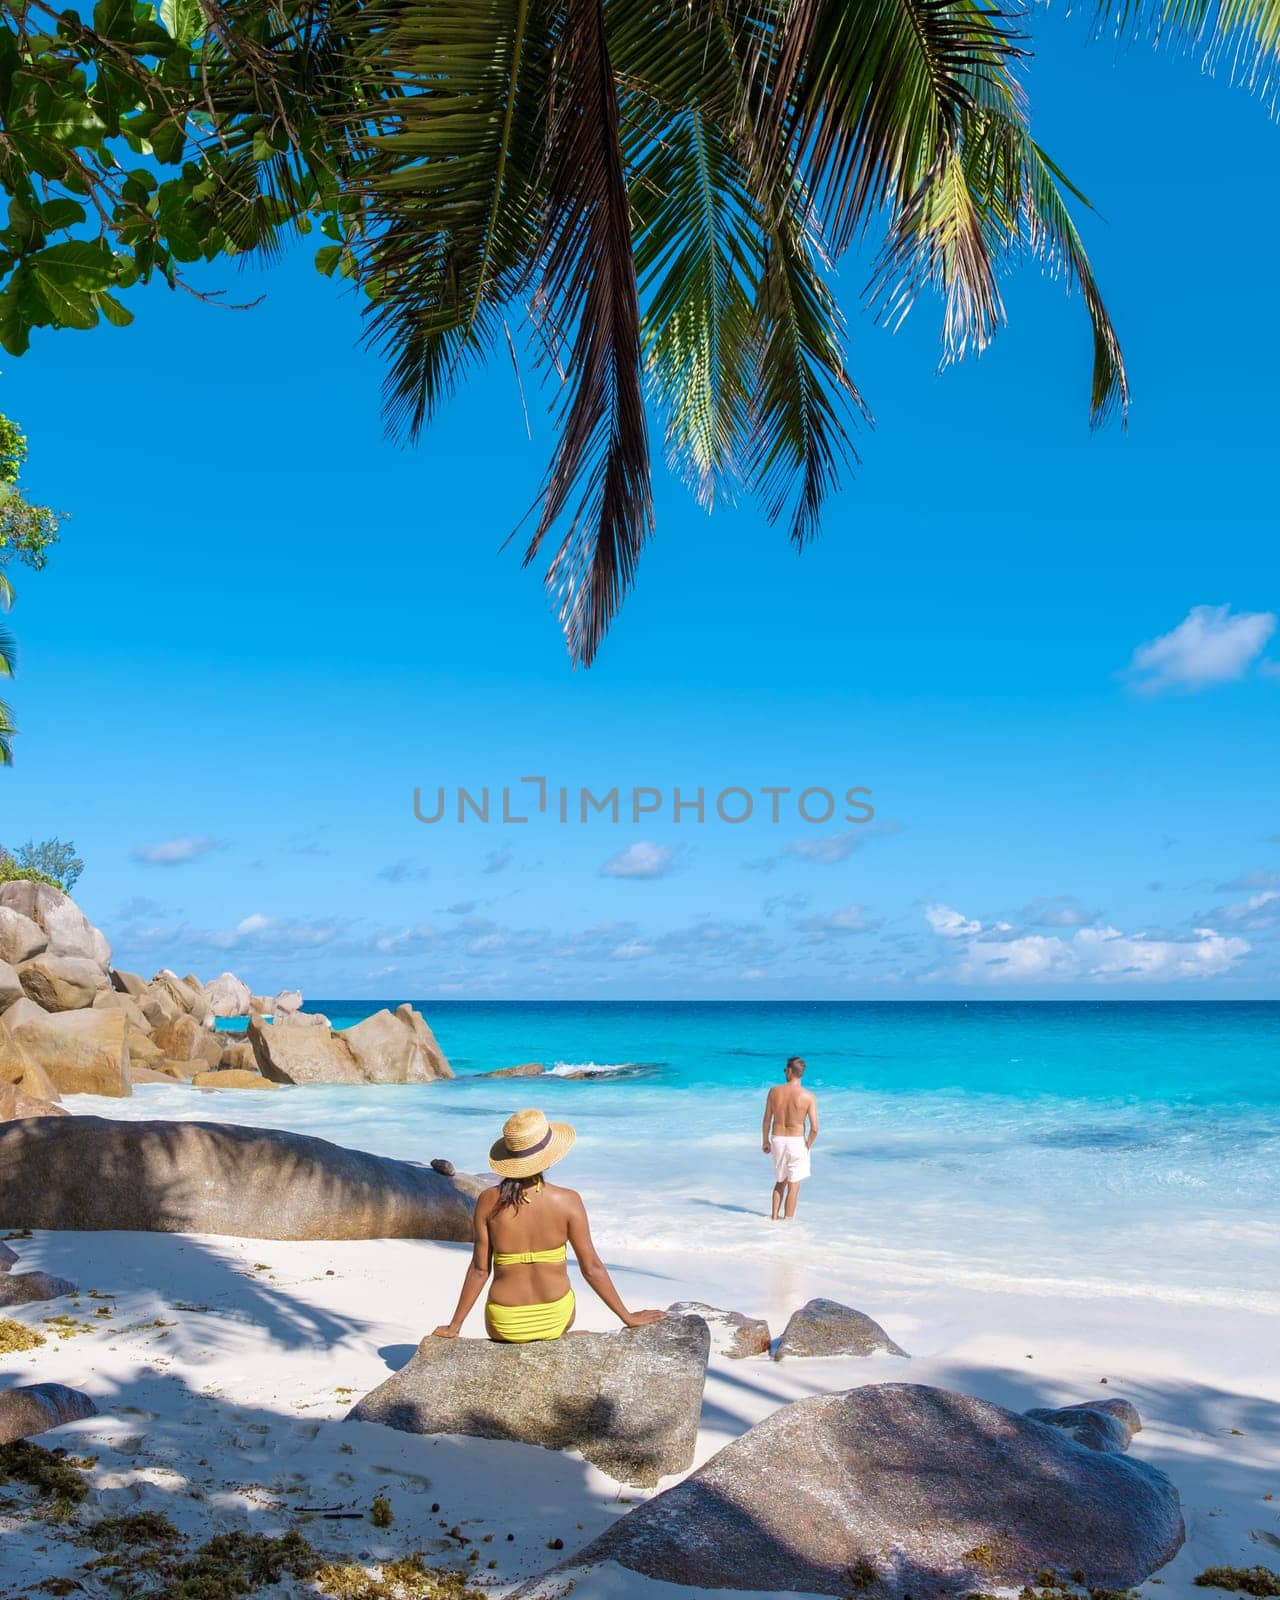 Anse Lazio Praslin Seychelles, a young couple of men and women on a tropical beach during vacation by fokkebok